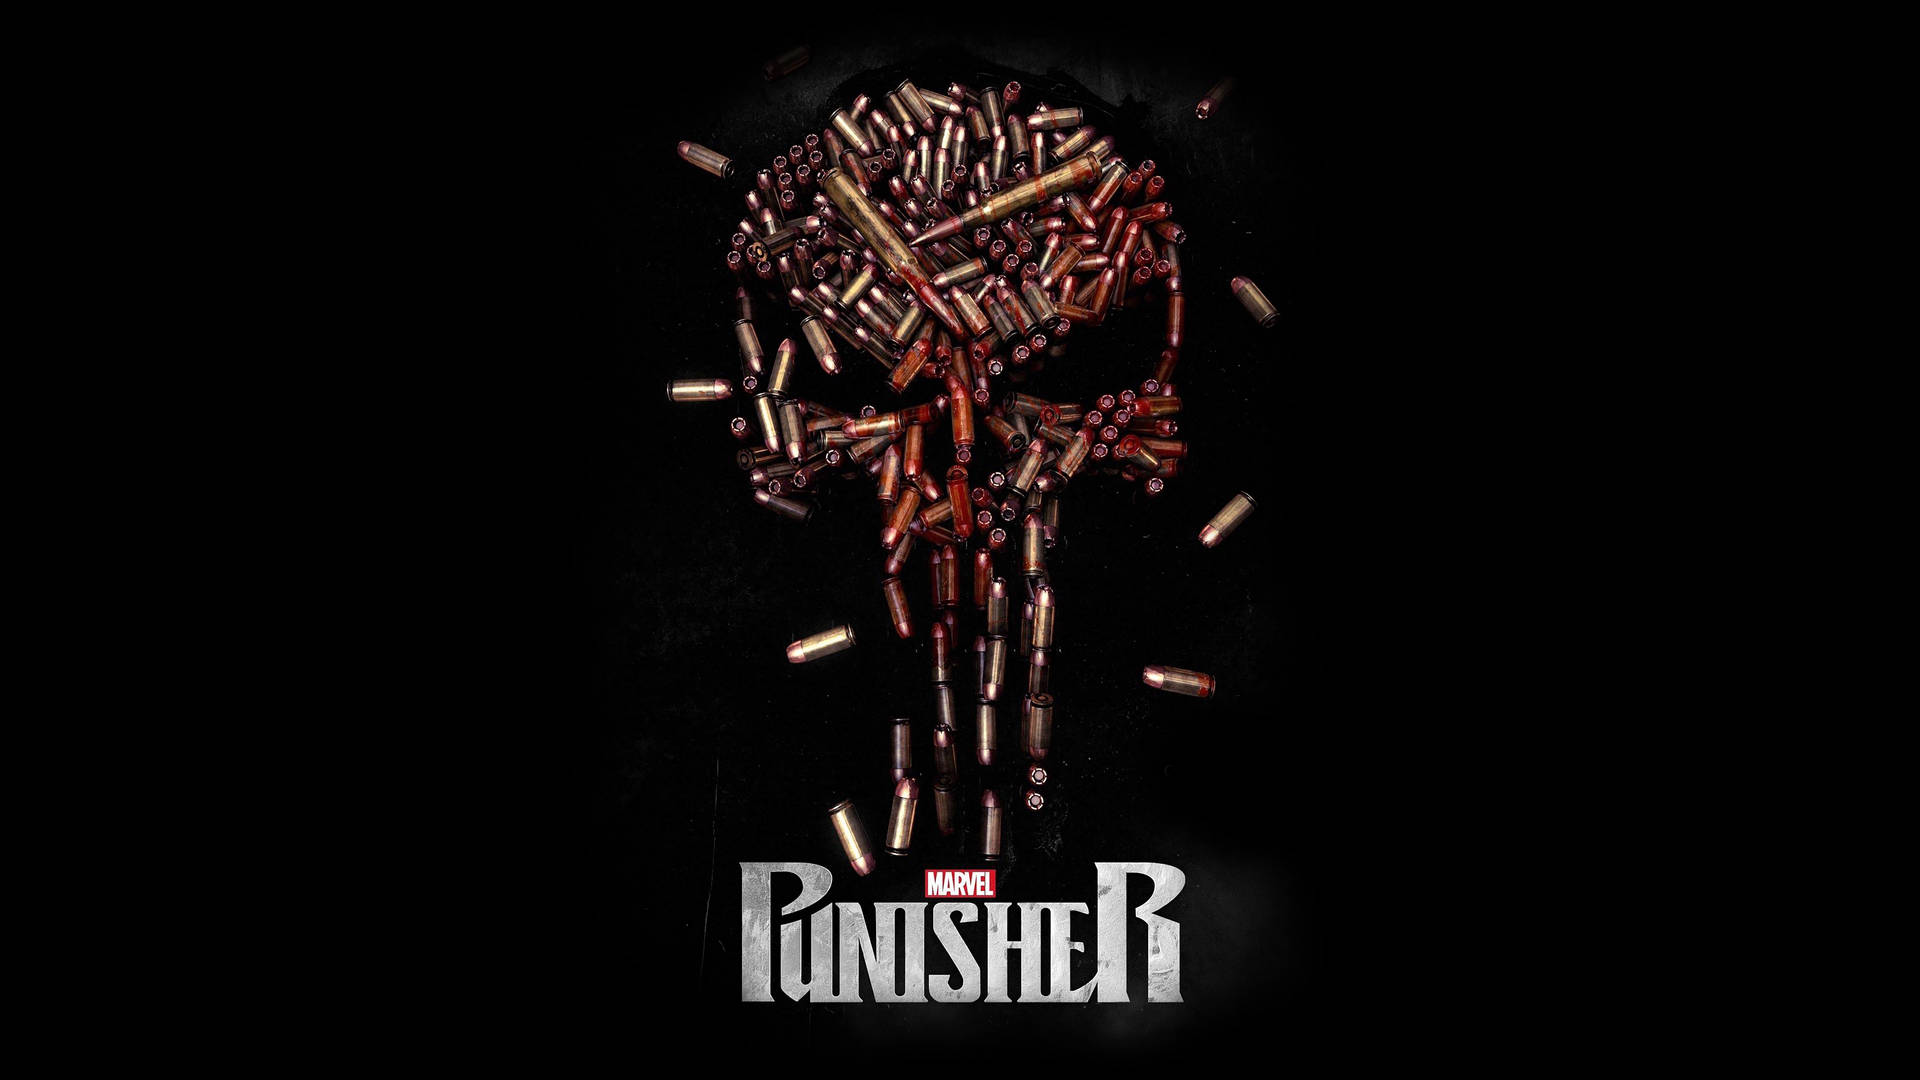 "The Punisher: Justice is in his Hands" Wallpaper